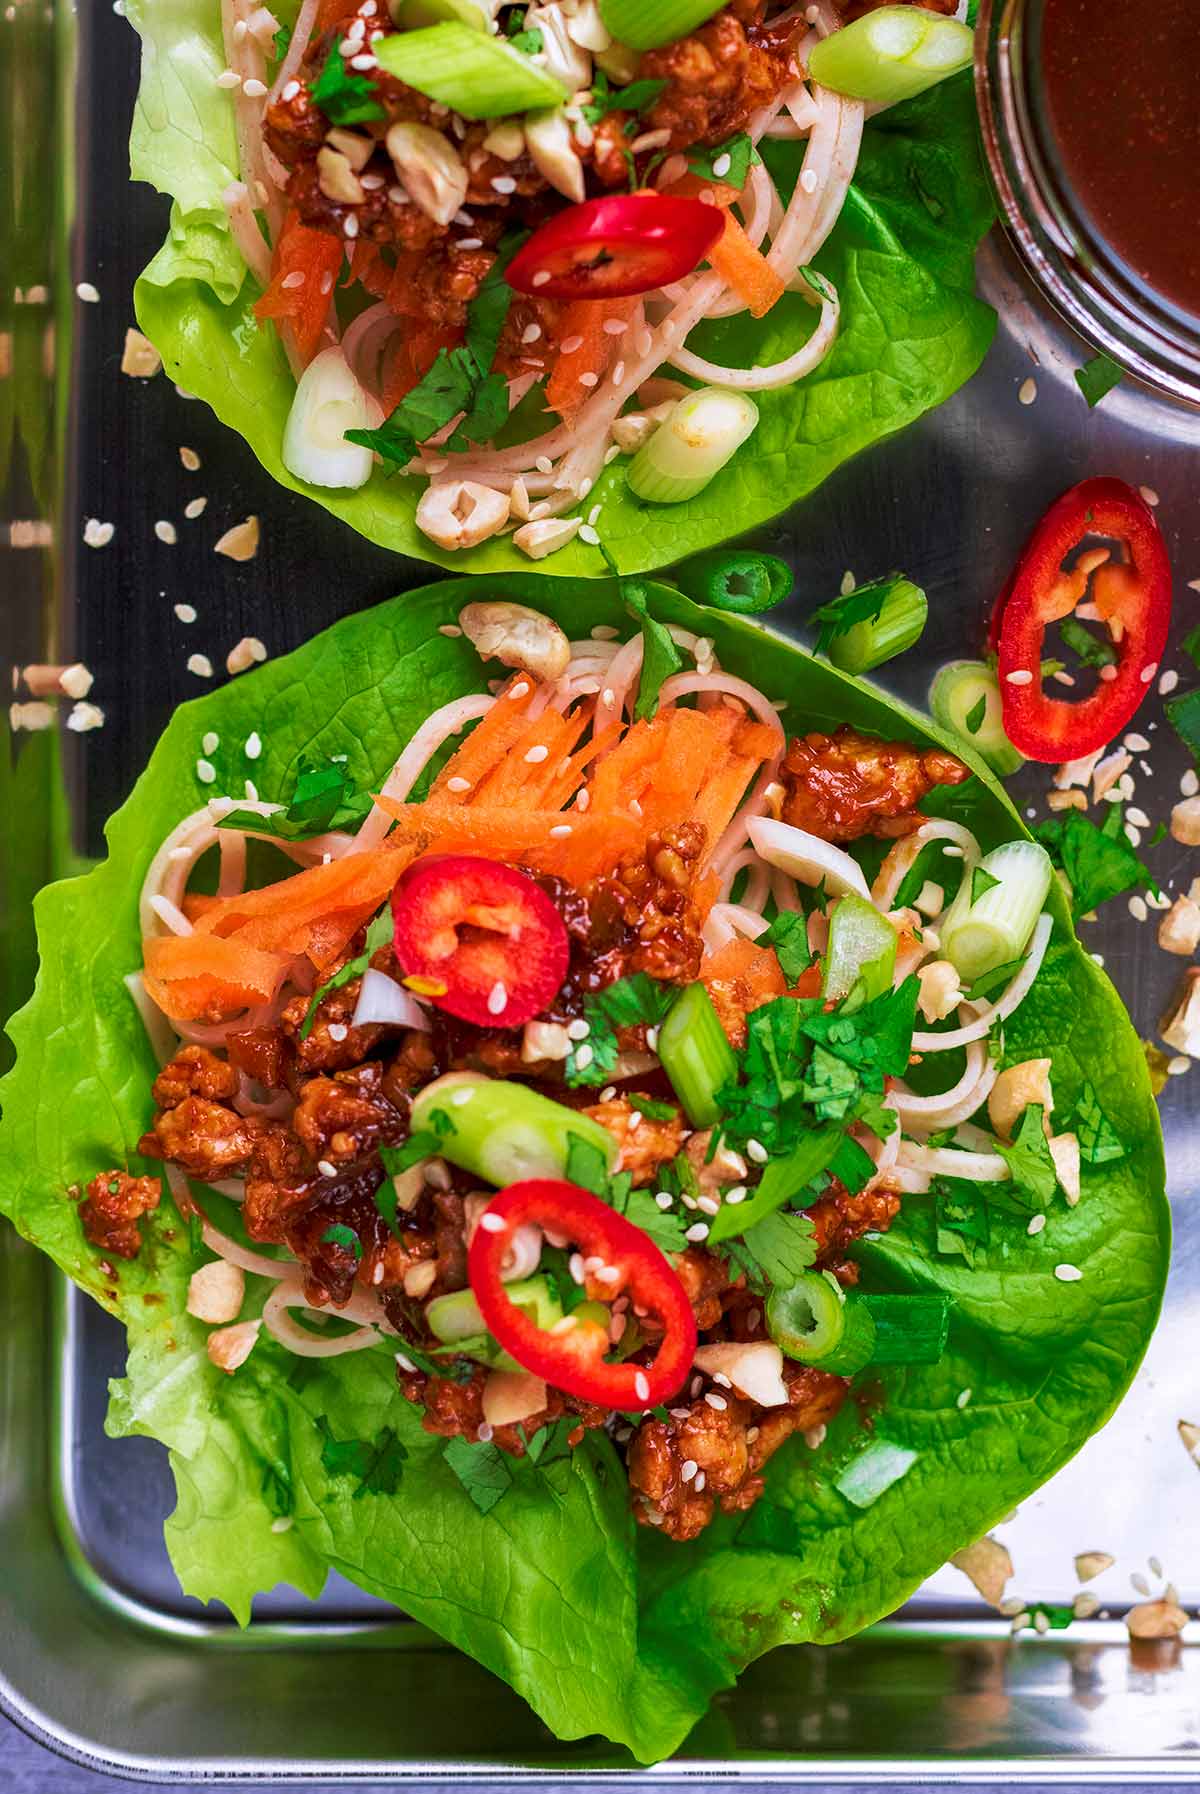 A large lettuce leaf topped with ground chicken, vegetables and sesame seeds.